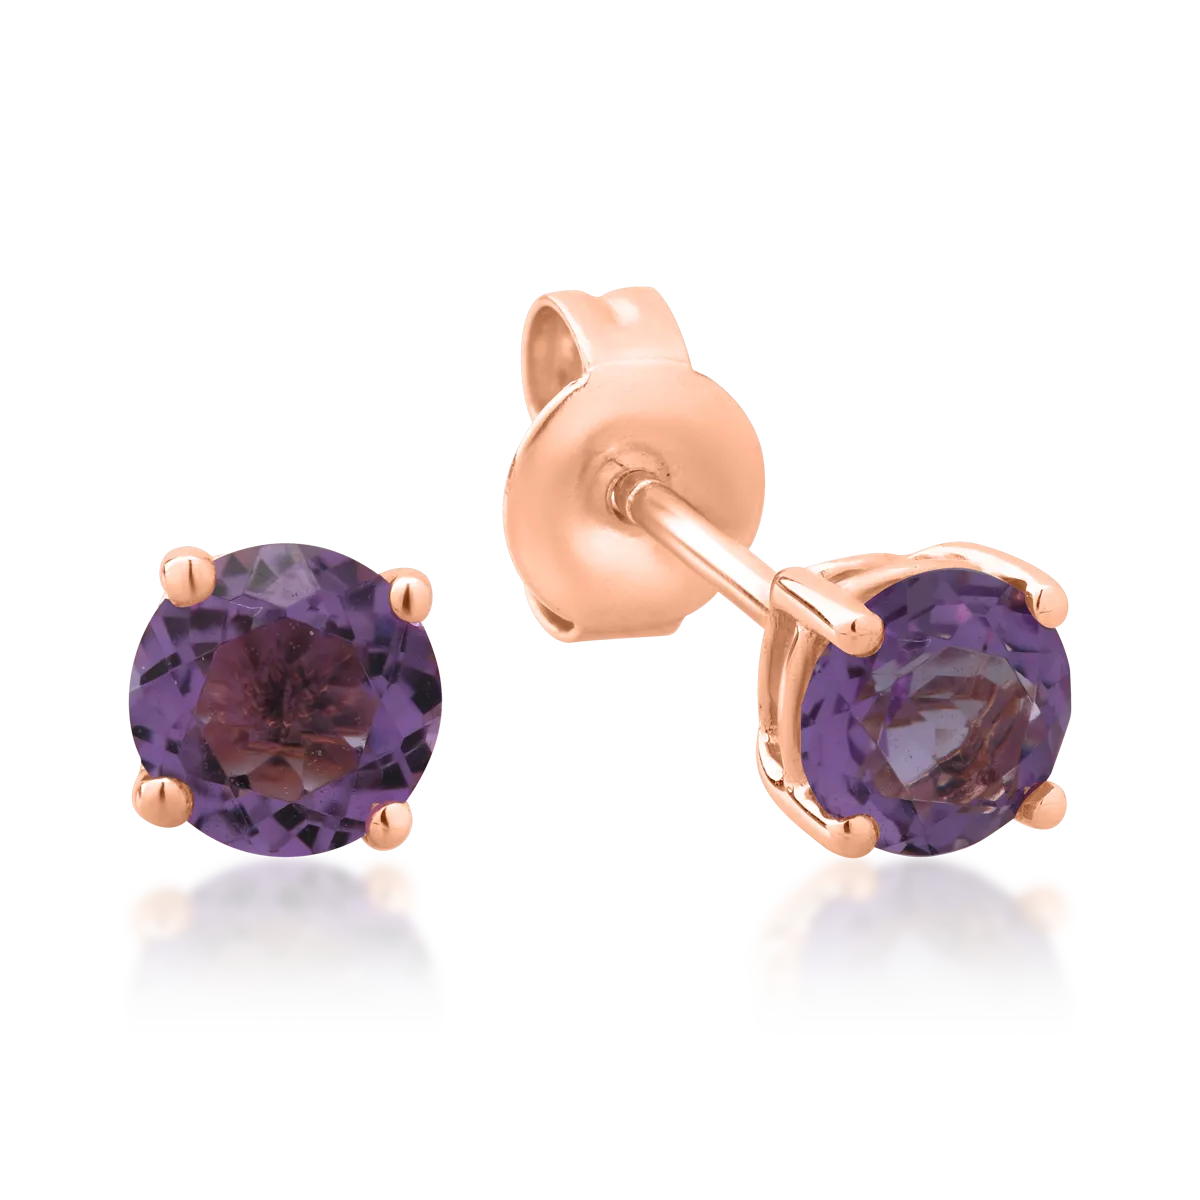 14K rose gold earrings with amethysts of 0.999ct